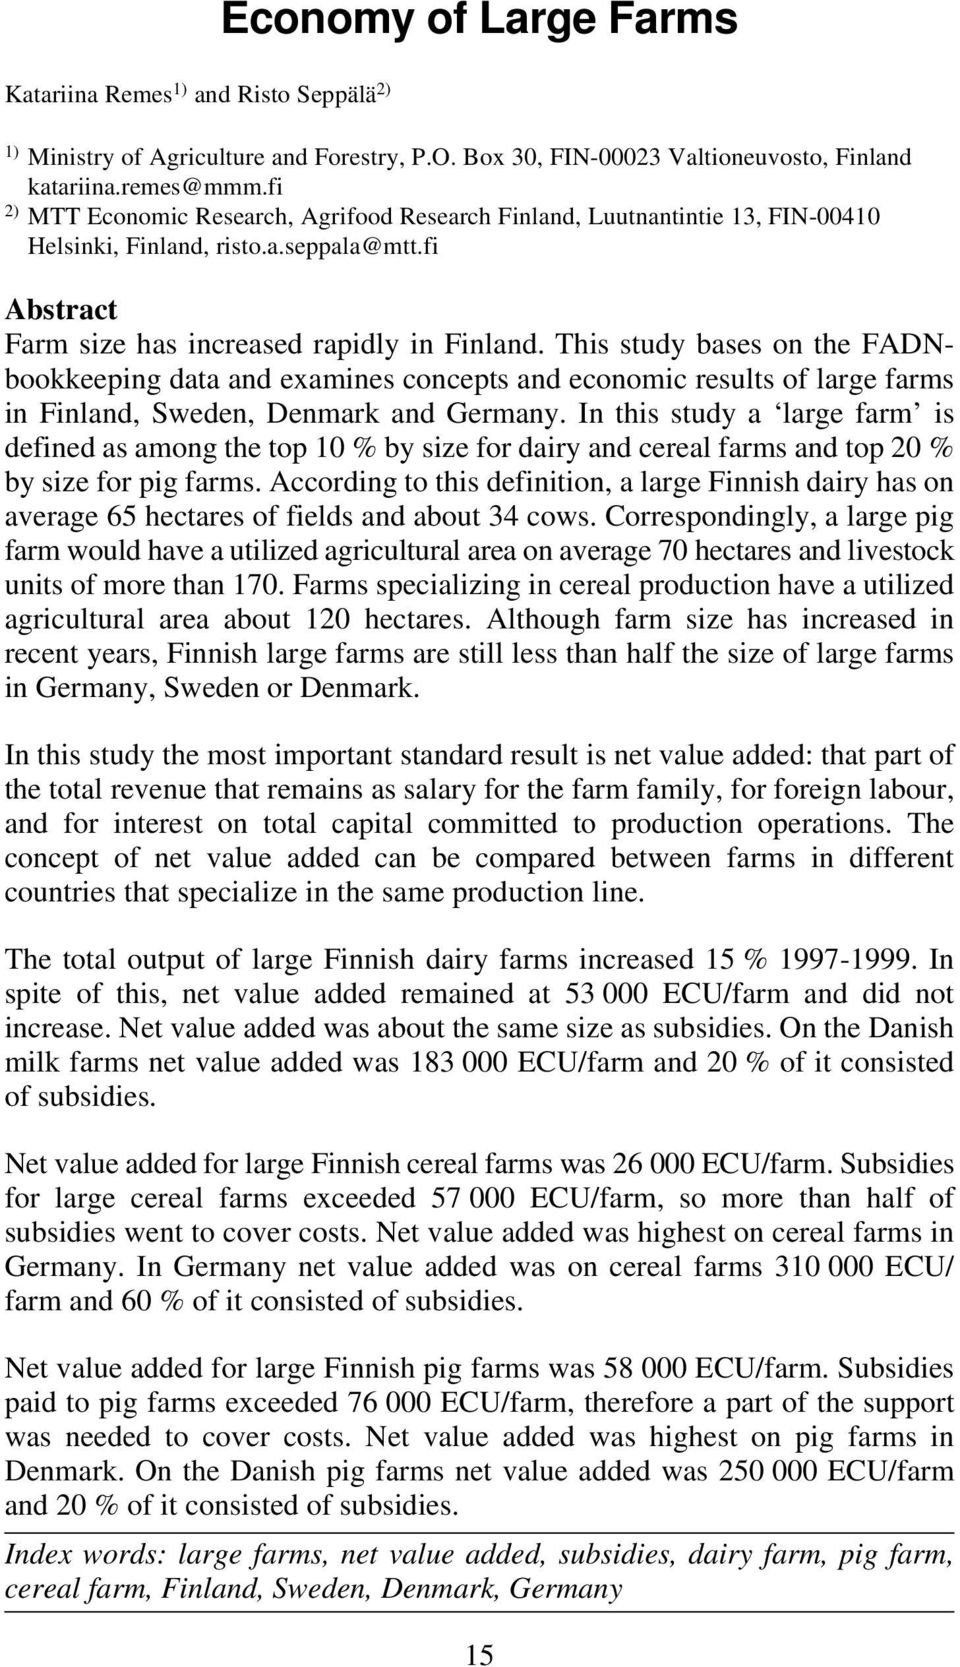 This study bases on the FADNbookkeeping data and examines concepts and economic results of large farms in Finland, Sweden, Denmark and Germany.